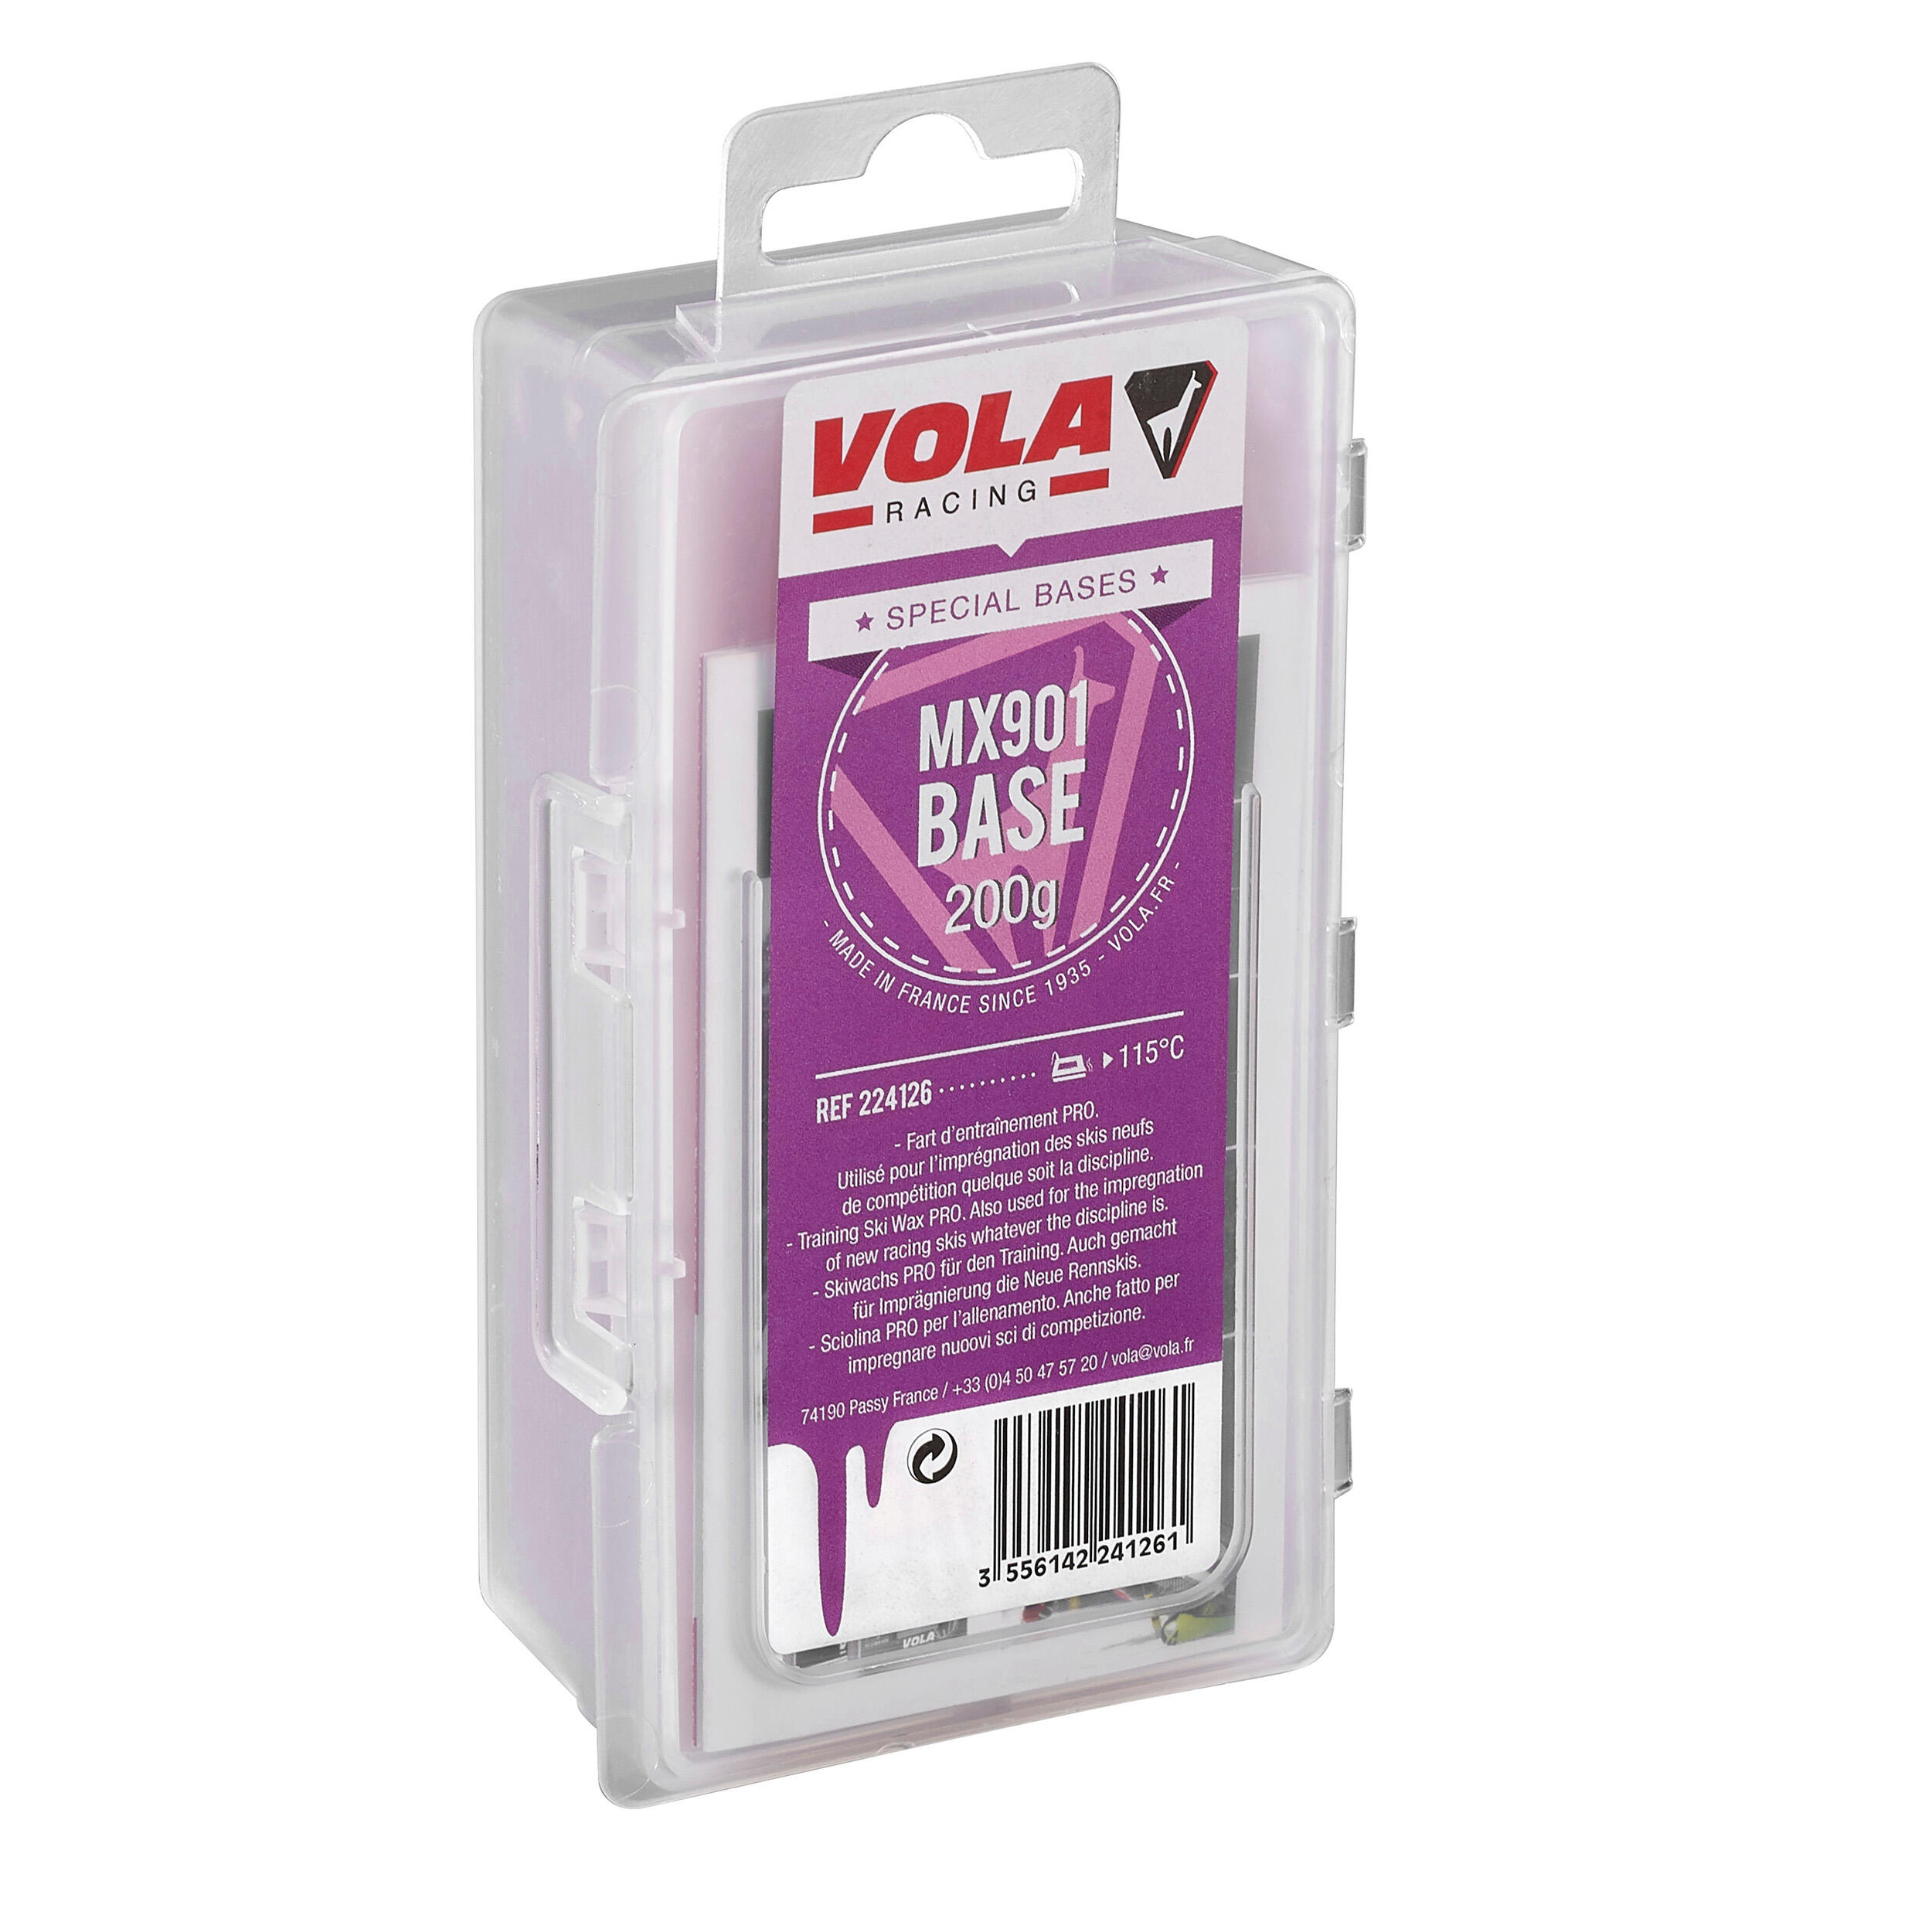 WAX MX901 200 g Vola base wax for skis or snowboards. 2/2